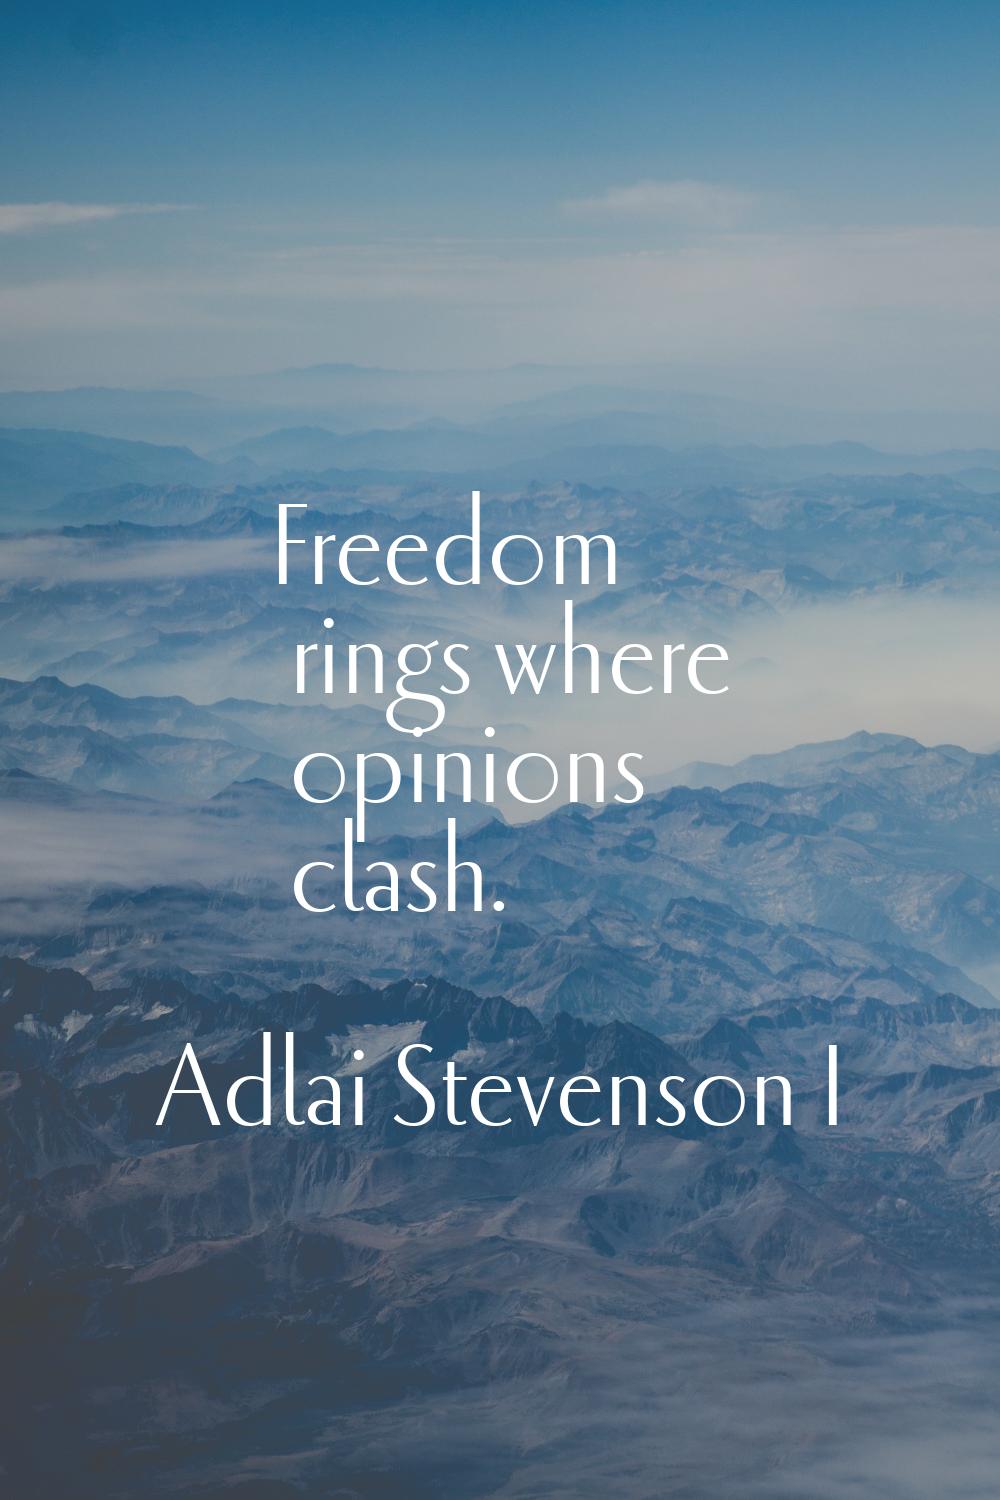 Freedom rings where opinions clash.